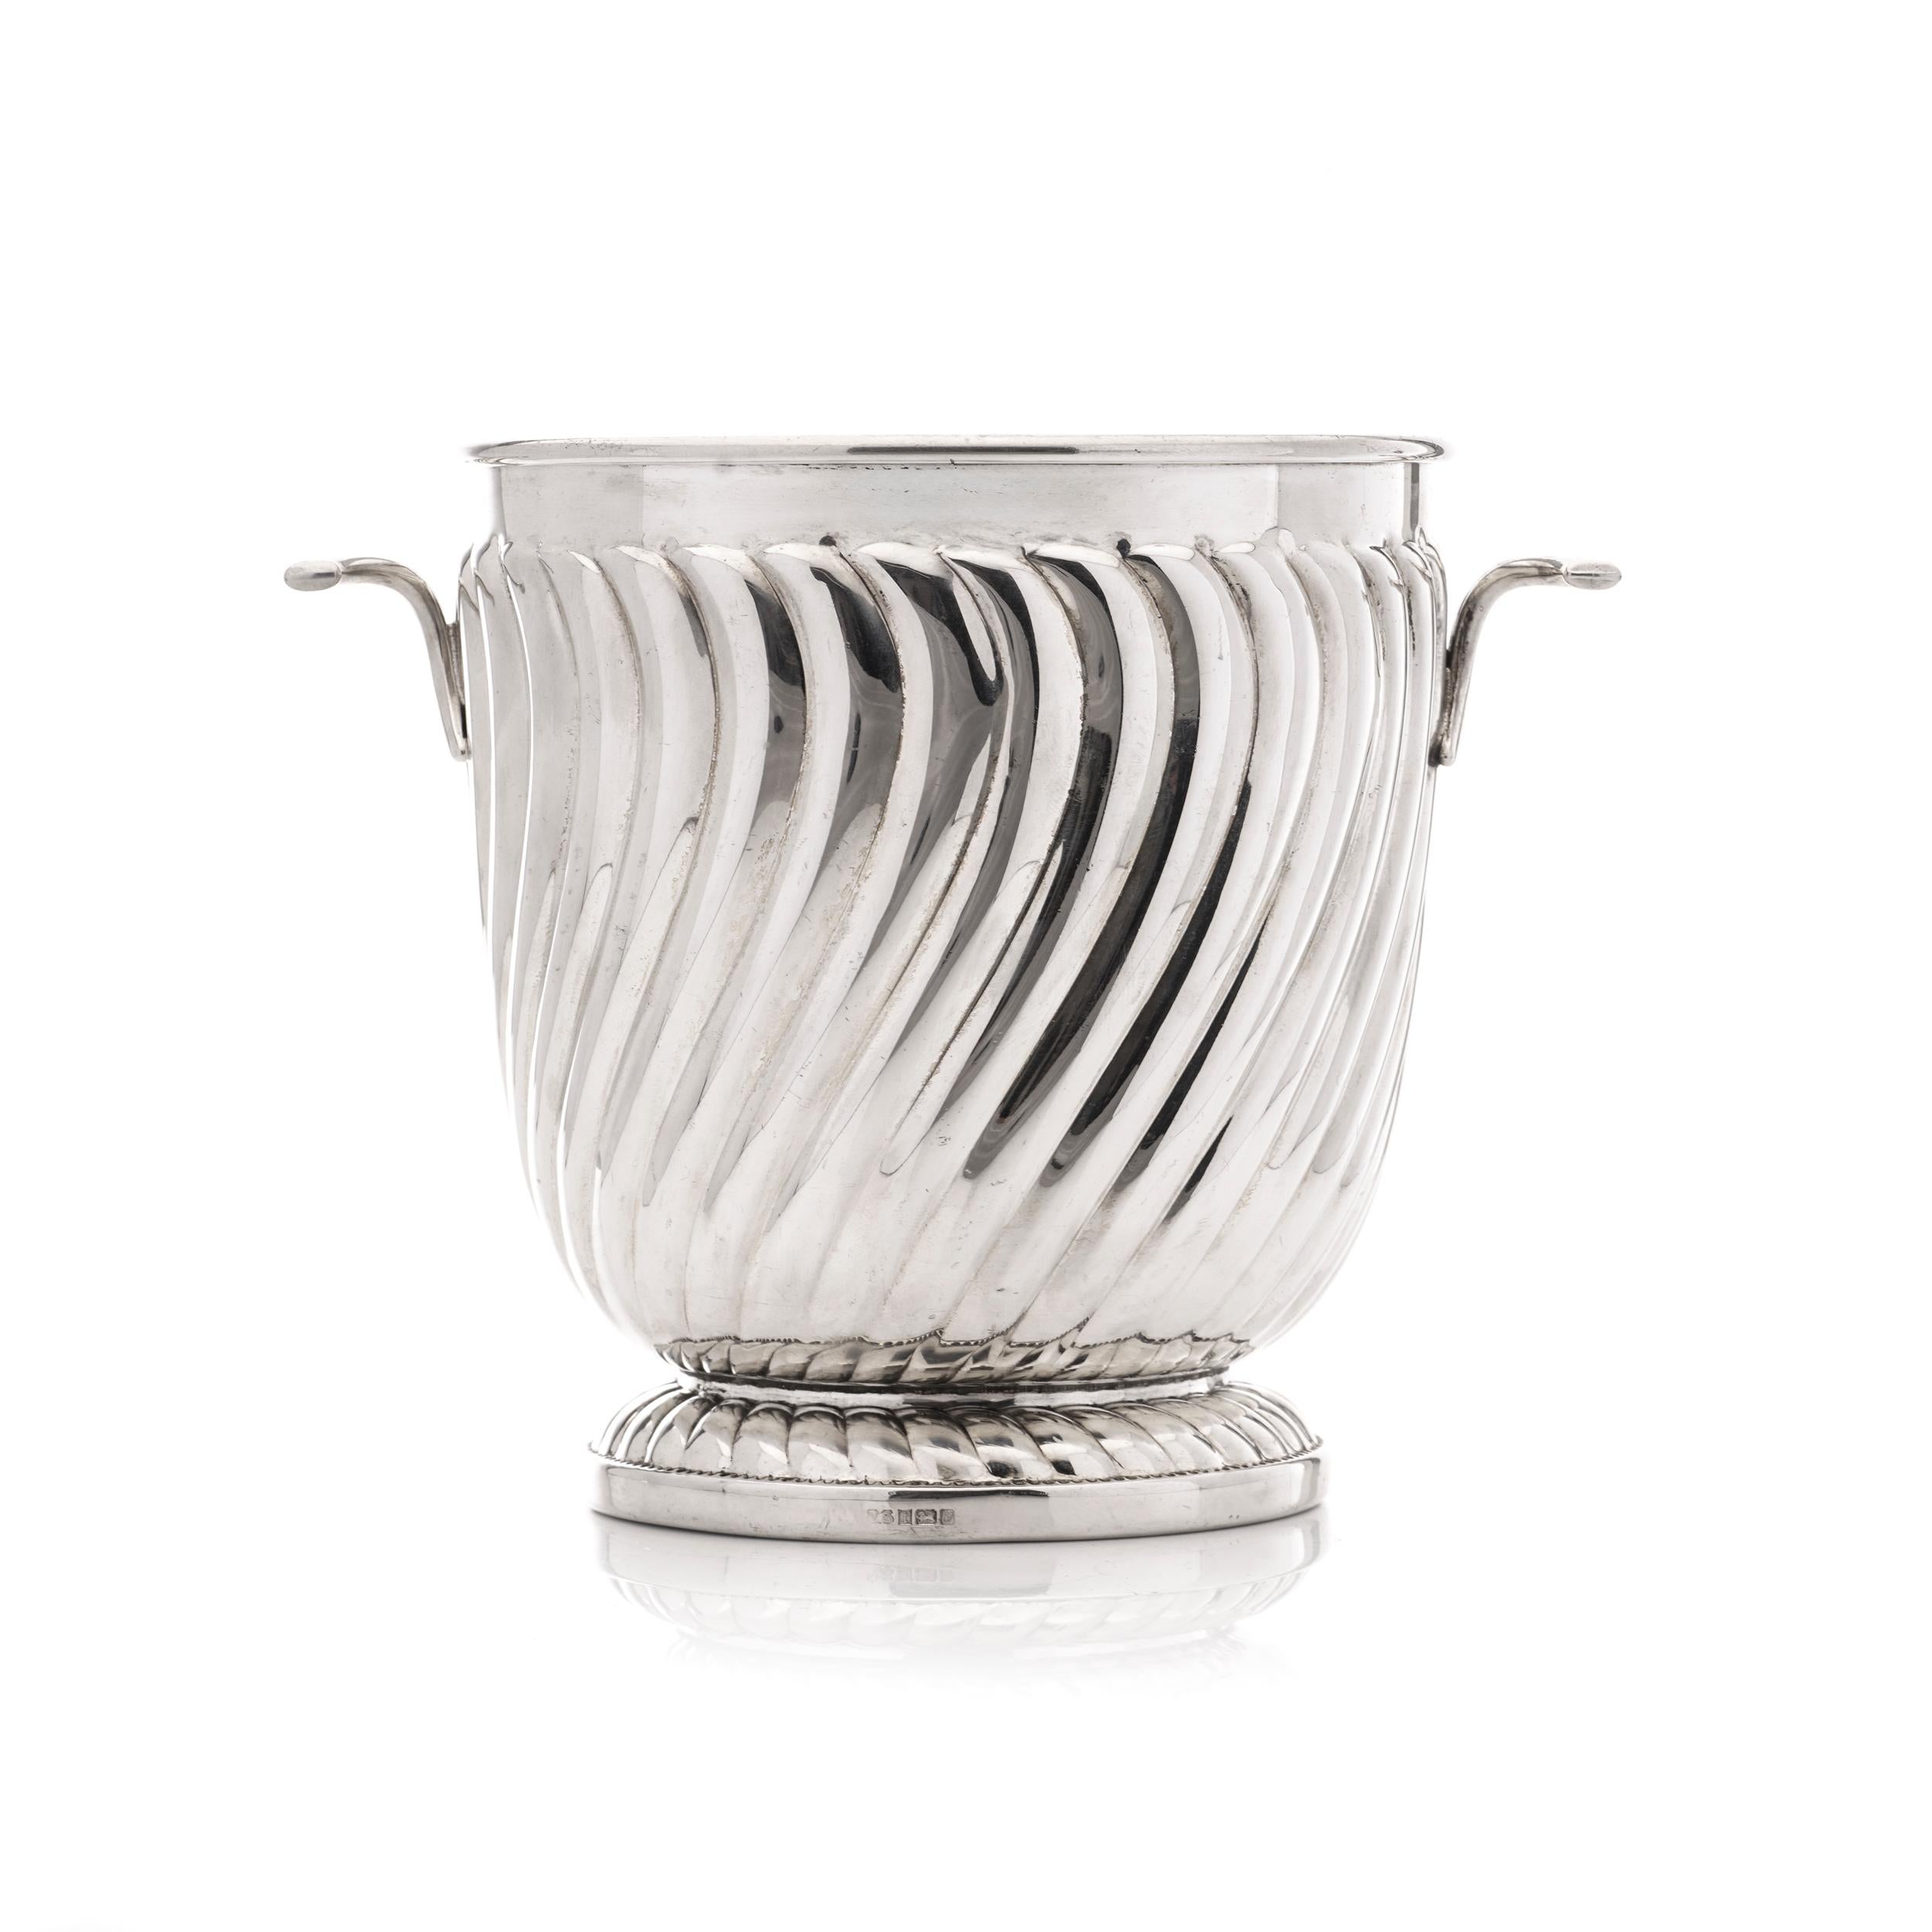 Late 20th century 925 sterling silver bowl by Victoria Silverware Ltd.

Made in England, Birmingham, 1996
Fully hallmarked.

Dimensions:
Height: 13.3 cm
Width: 16.5 cm 
Weight: 368 grams in total 

Condition: The item is pre - owned, in excellent